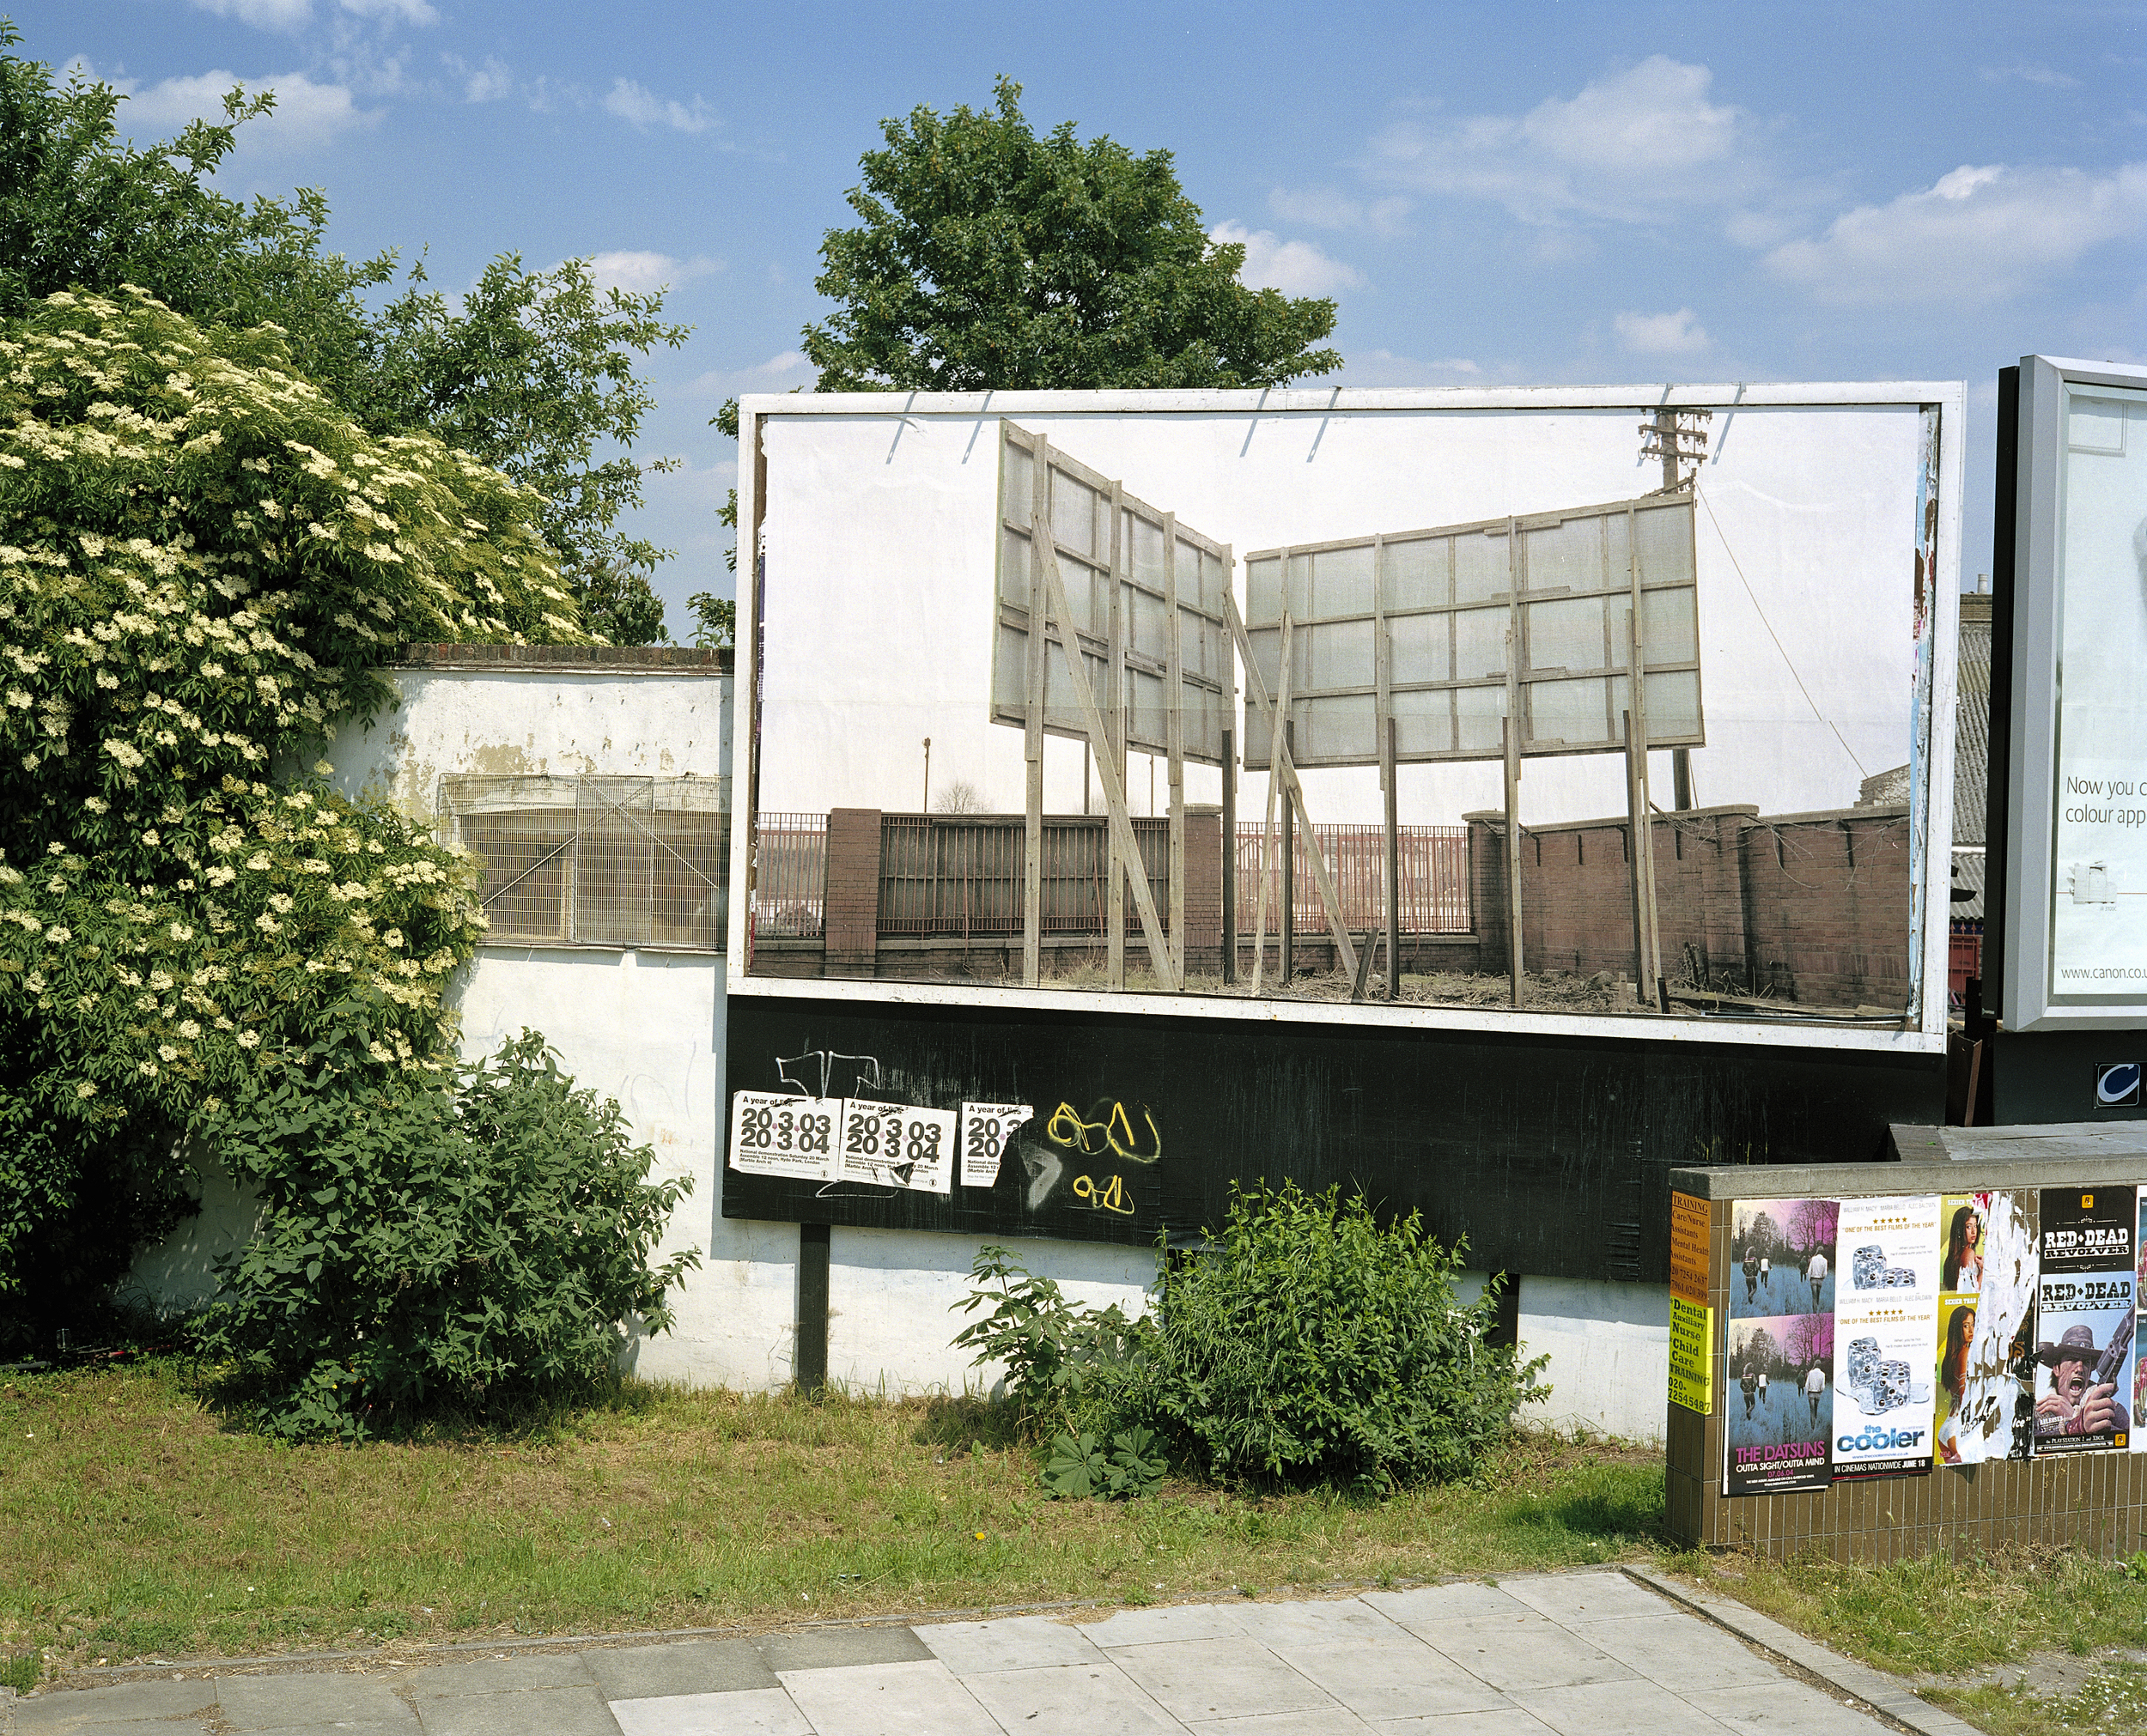 from the series Billboards